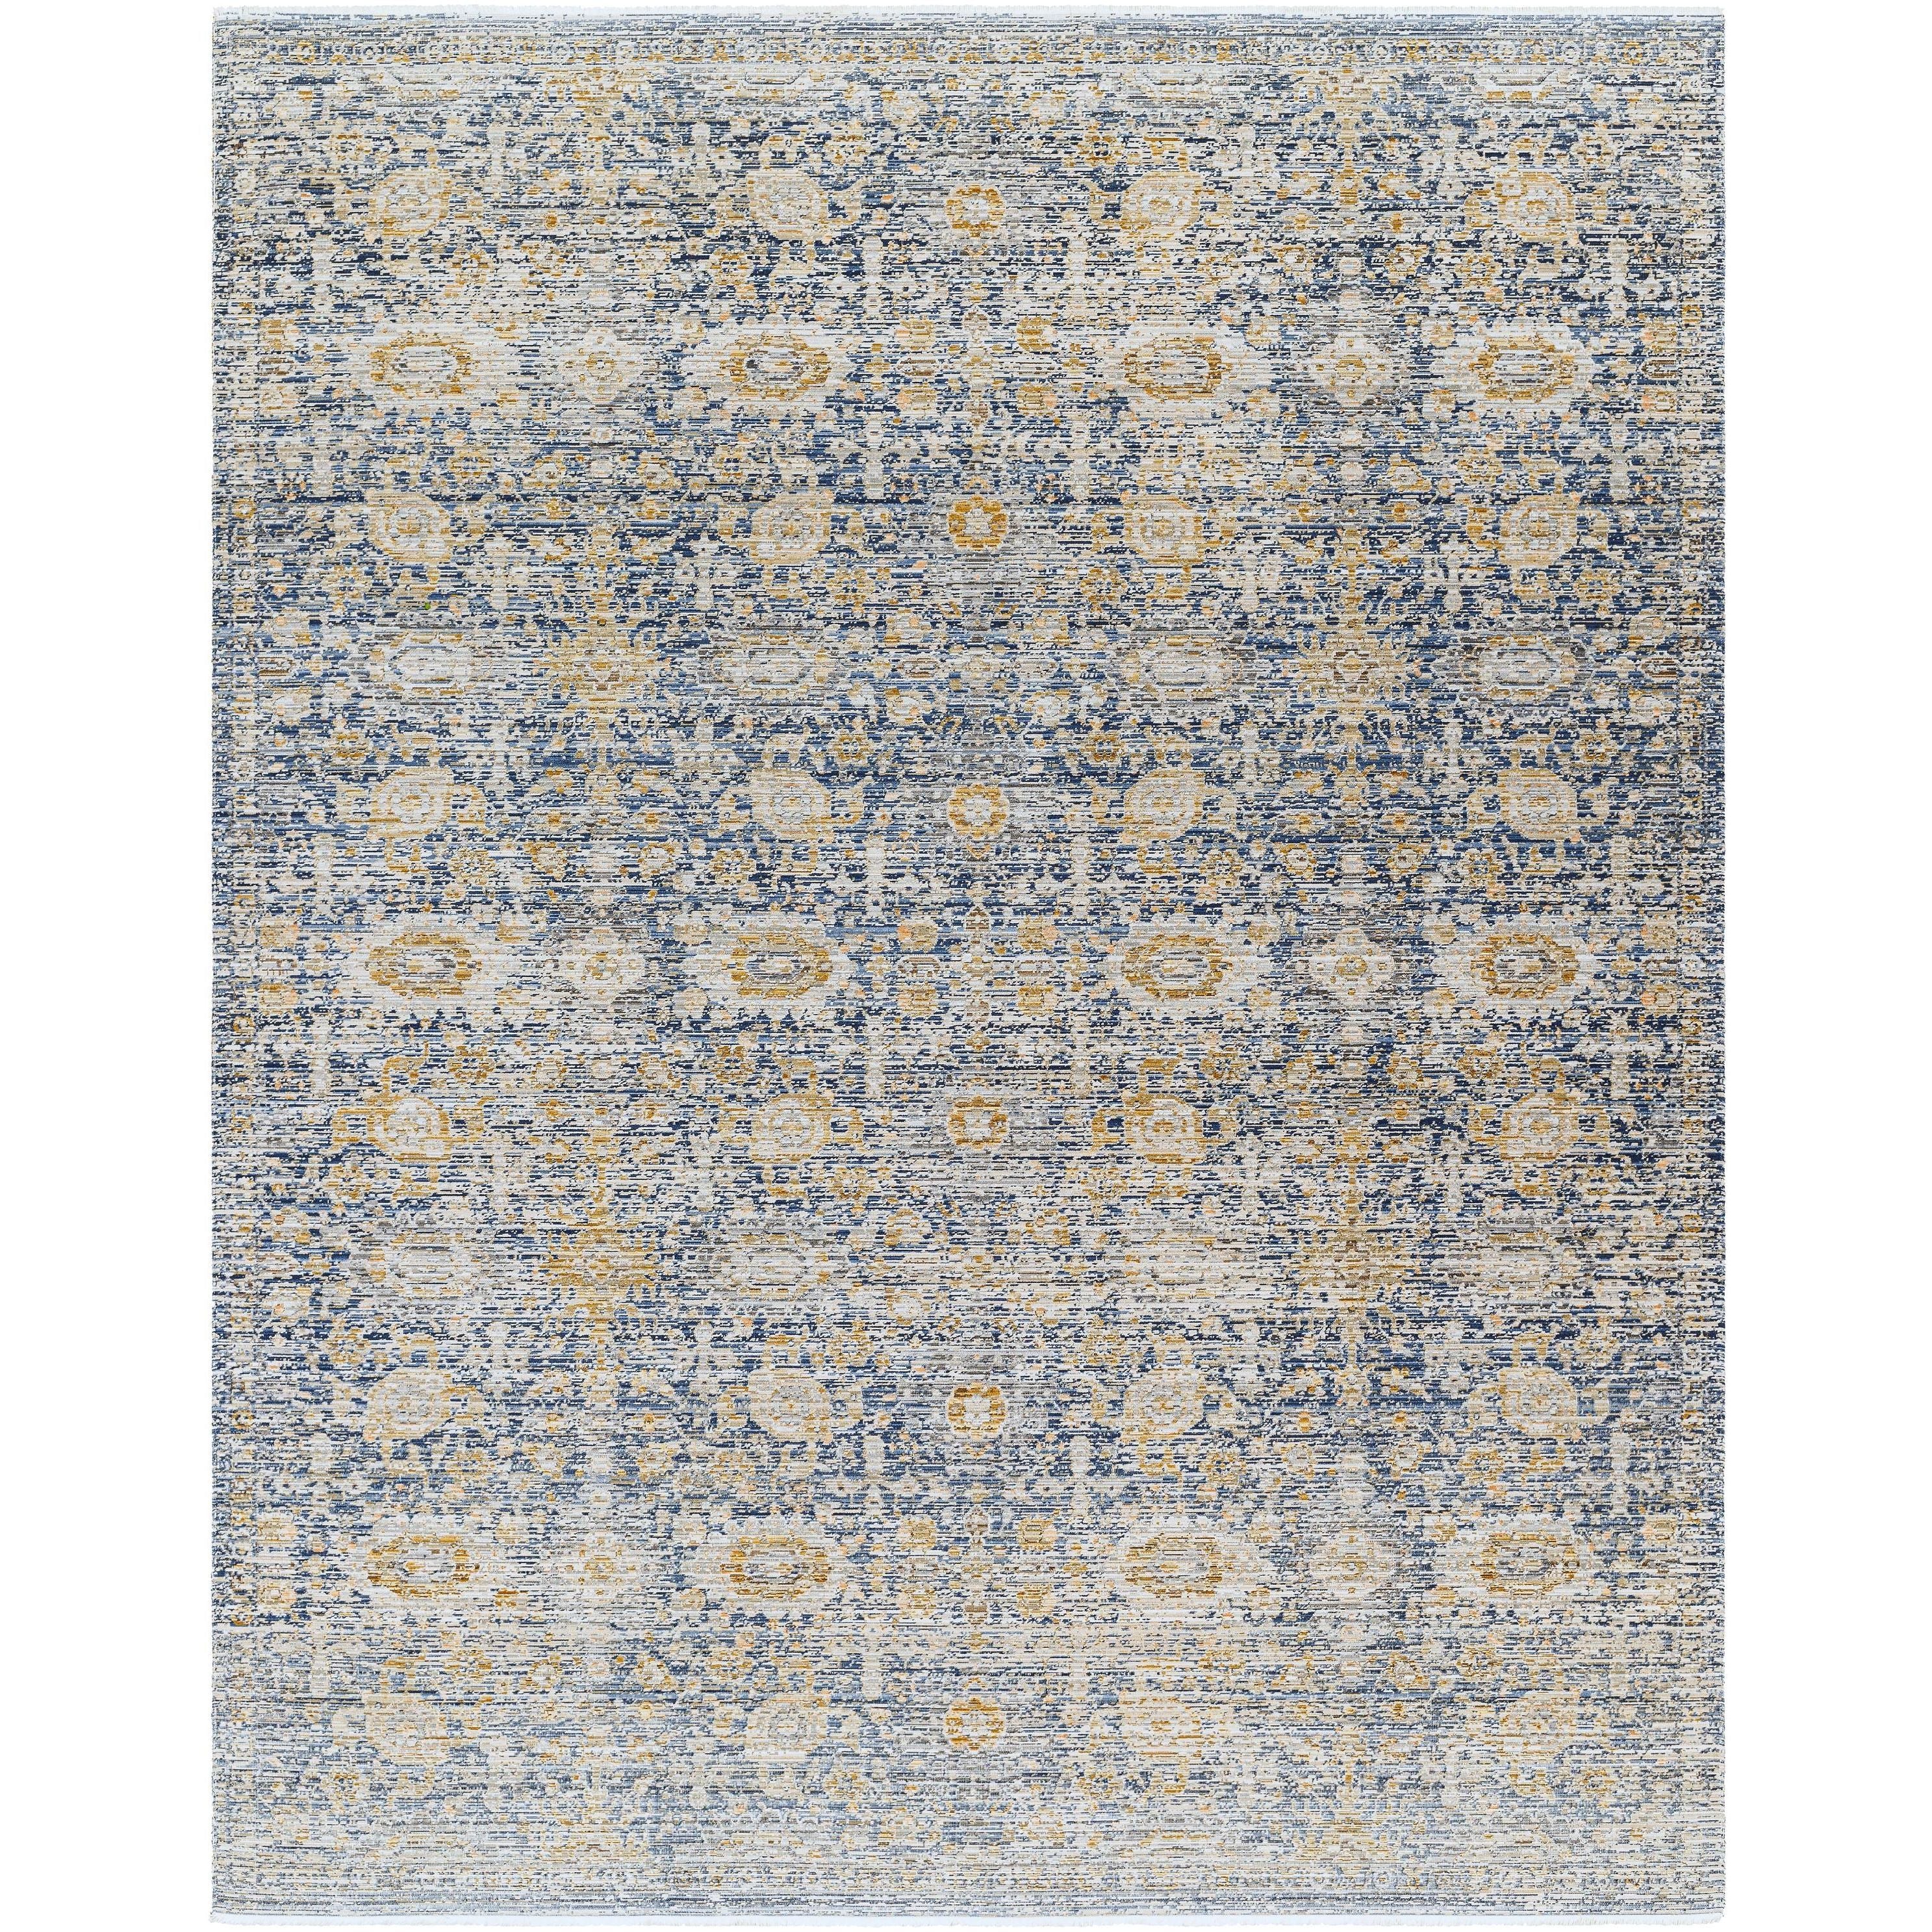 Introducing the Margaret area rug, designed as a special collaboration for our Becki Owens x Surya line! This exquisite rug is sure to transform any space into a beautiful oasis. It features a vintage floral design, crafted with polyester for maximum durability. The main colors of navy and taupe are woven together to create a stunning effect. Amethyst Home provides interior design, new home construction design consulting, vintage area rugs, and lighting in the Tampa metro area.